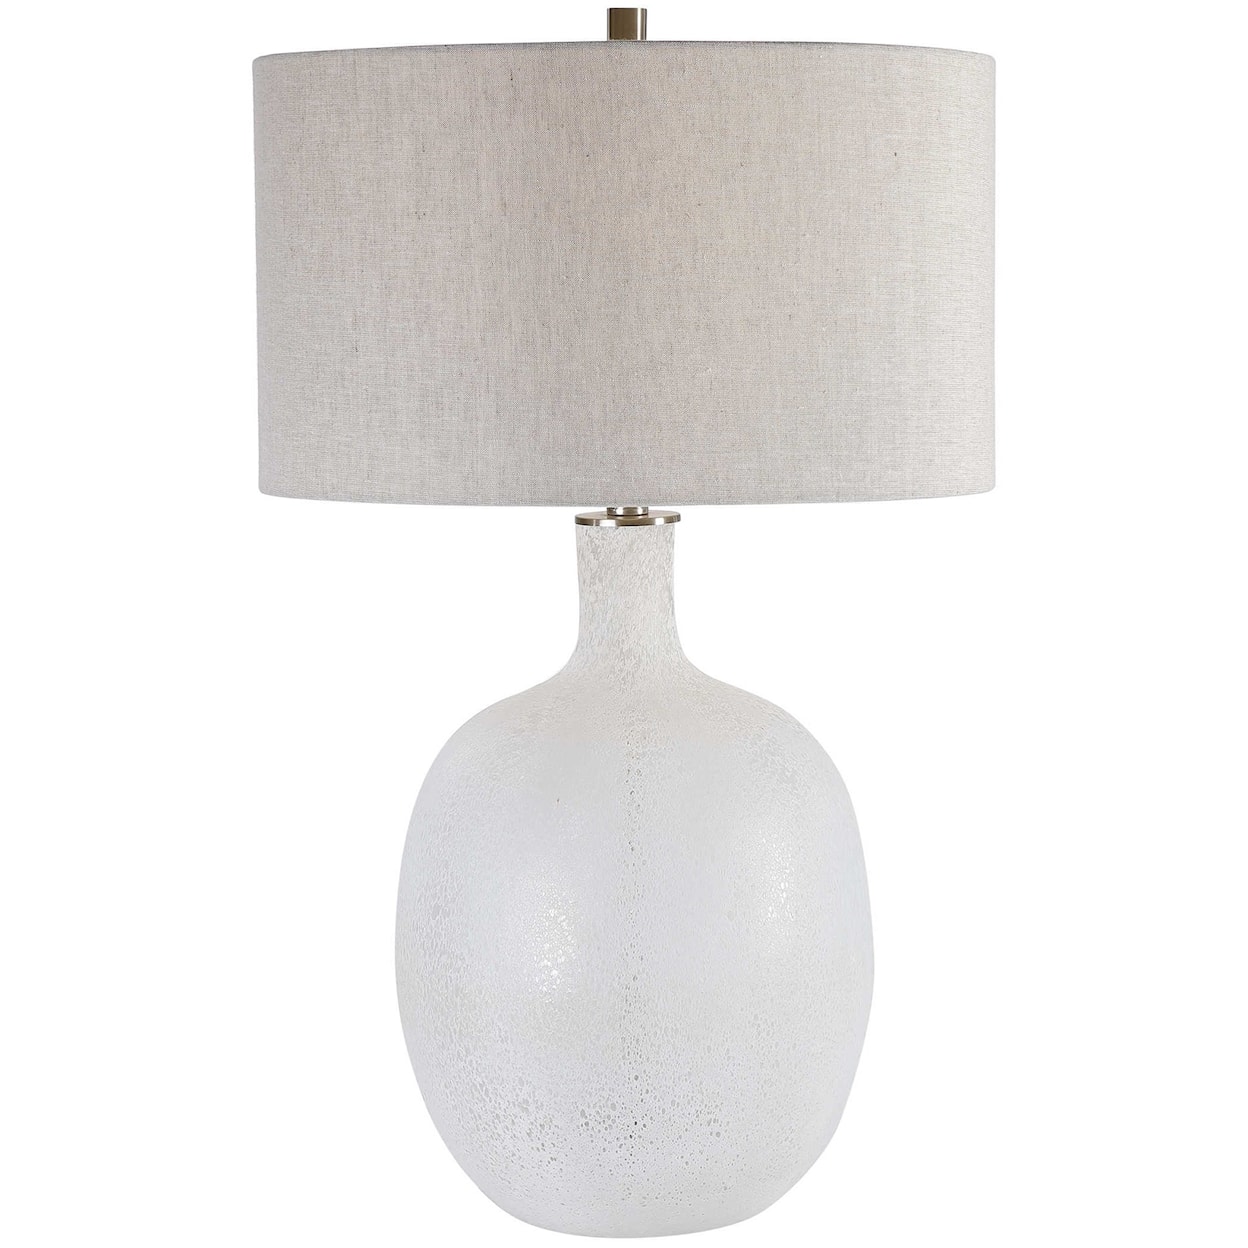 Uttermost Table Lamps Whiteout Mottled Glass Table Lamp